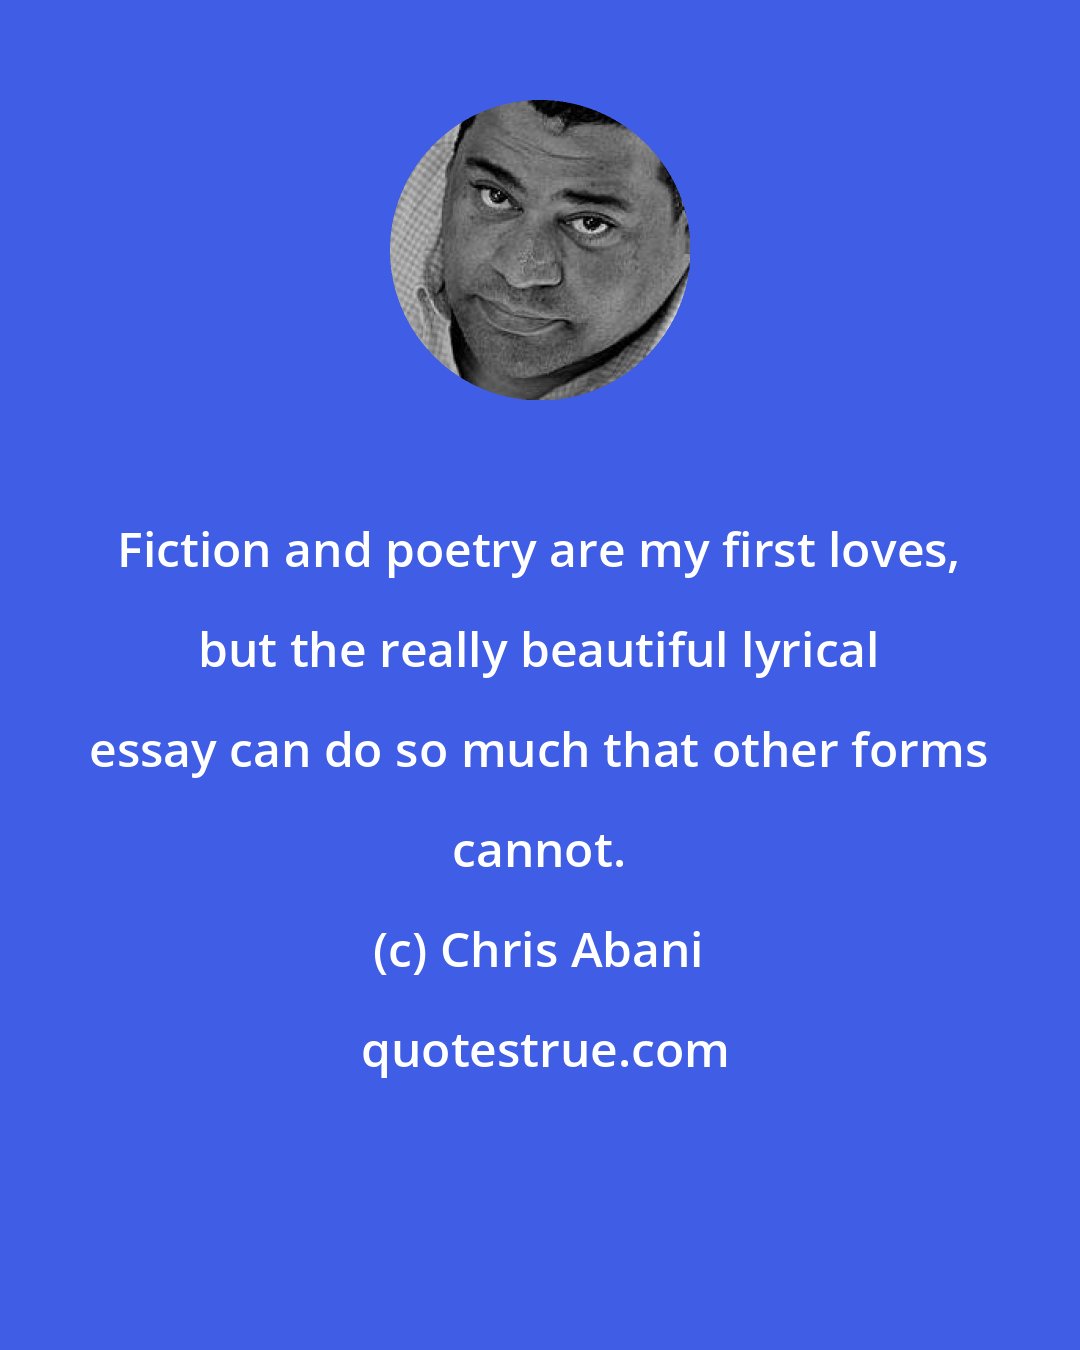 Chris Abani: Fiction and poetry are my first loves, but the really beautiful lyrical essay can do so much that other forms cannot.